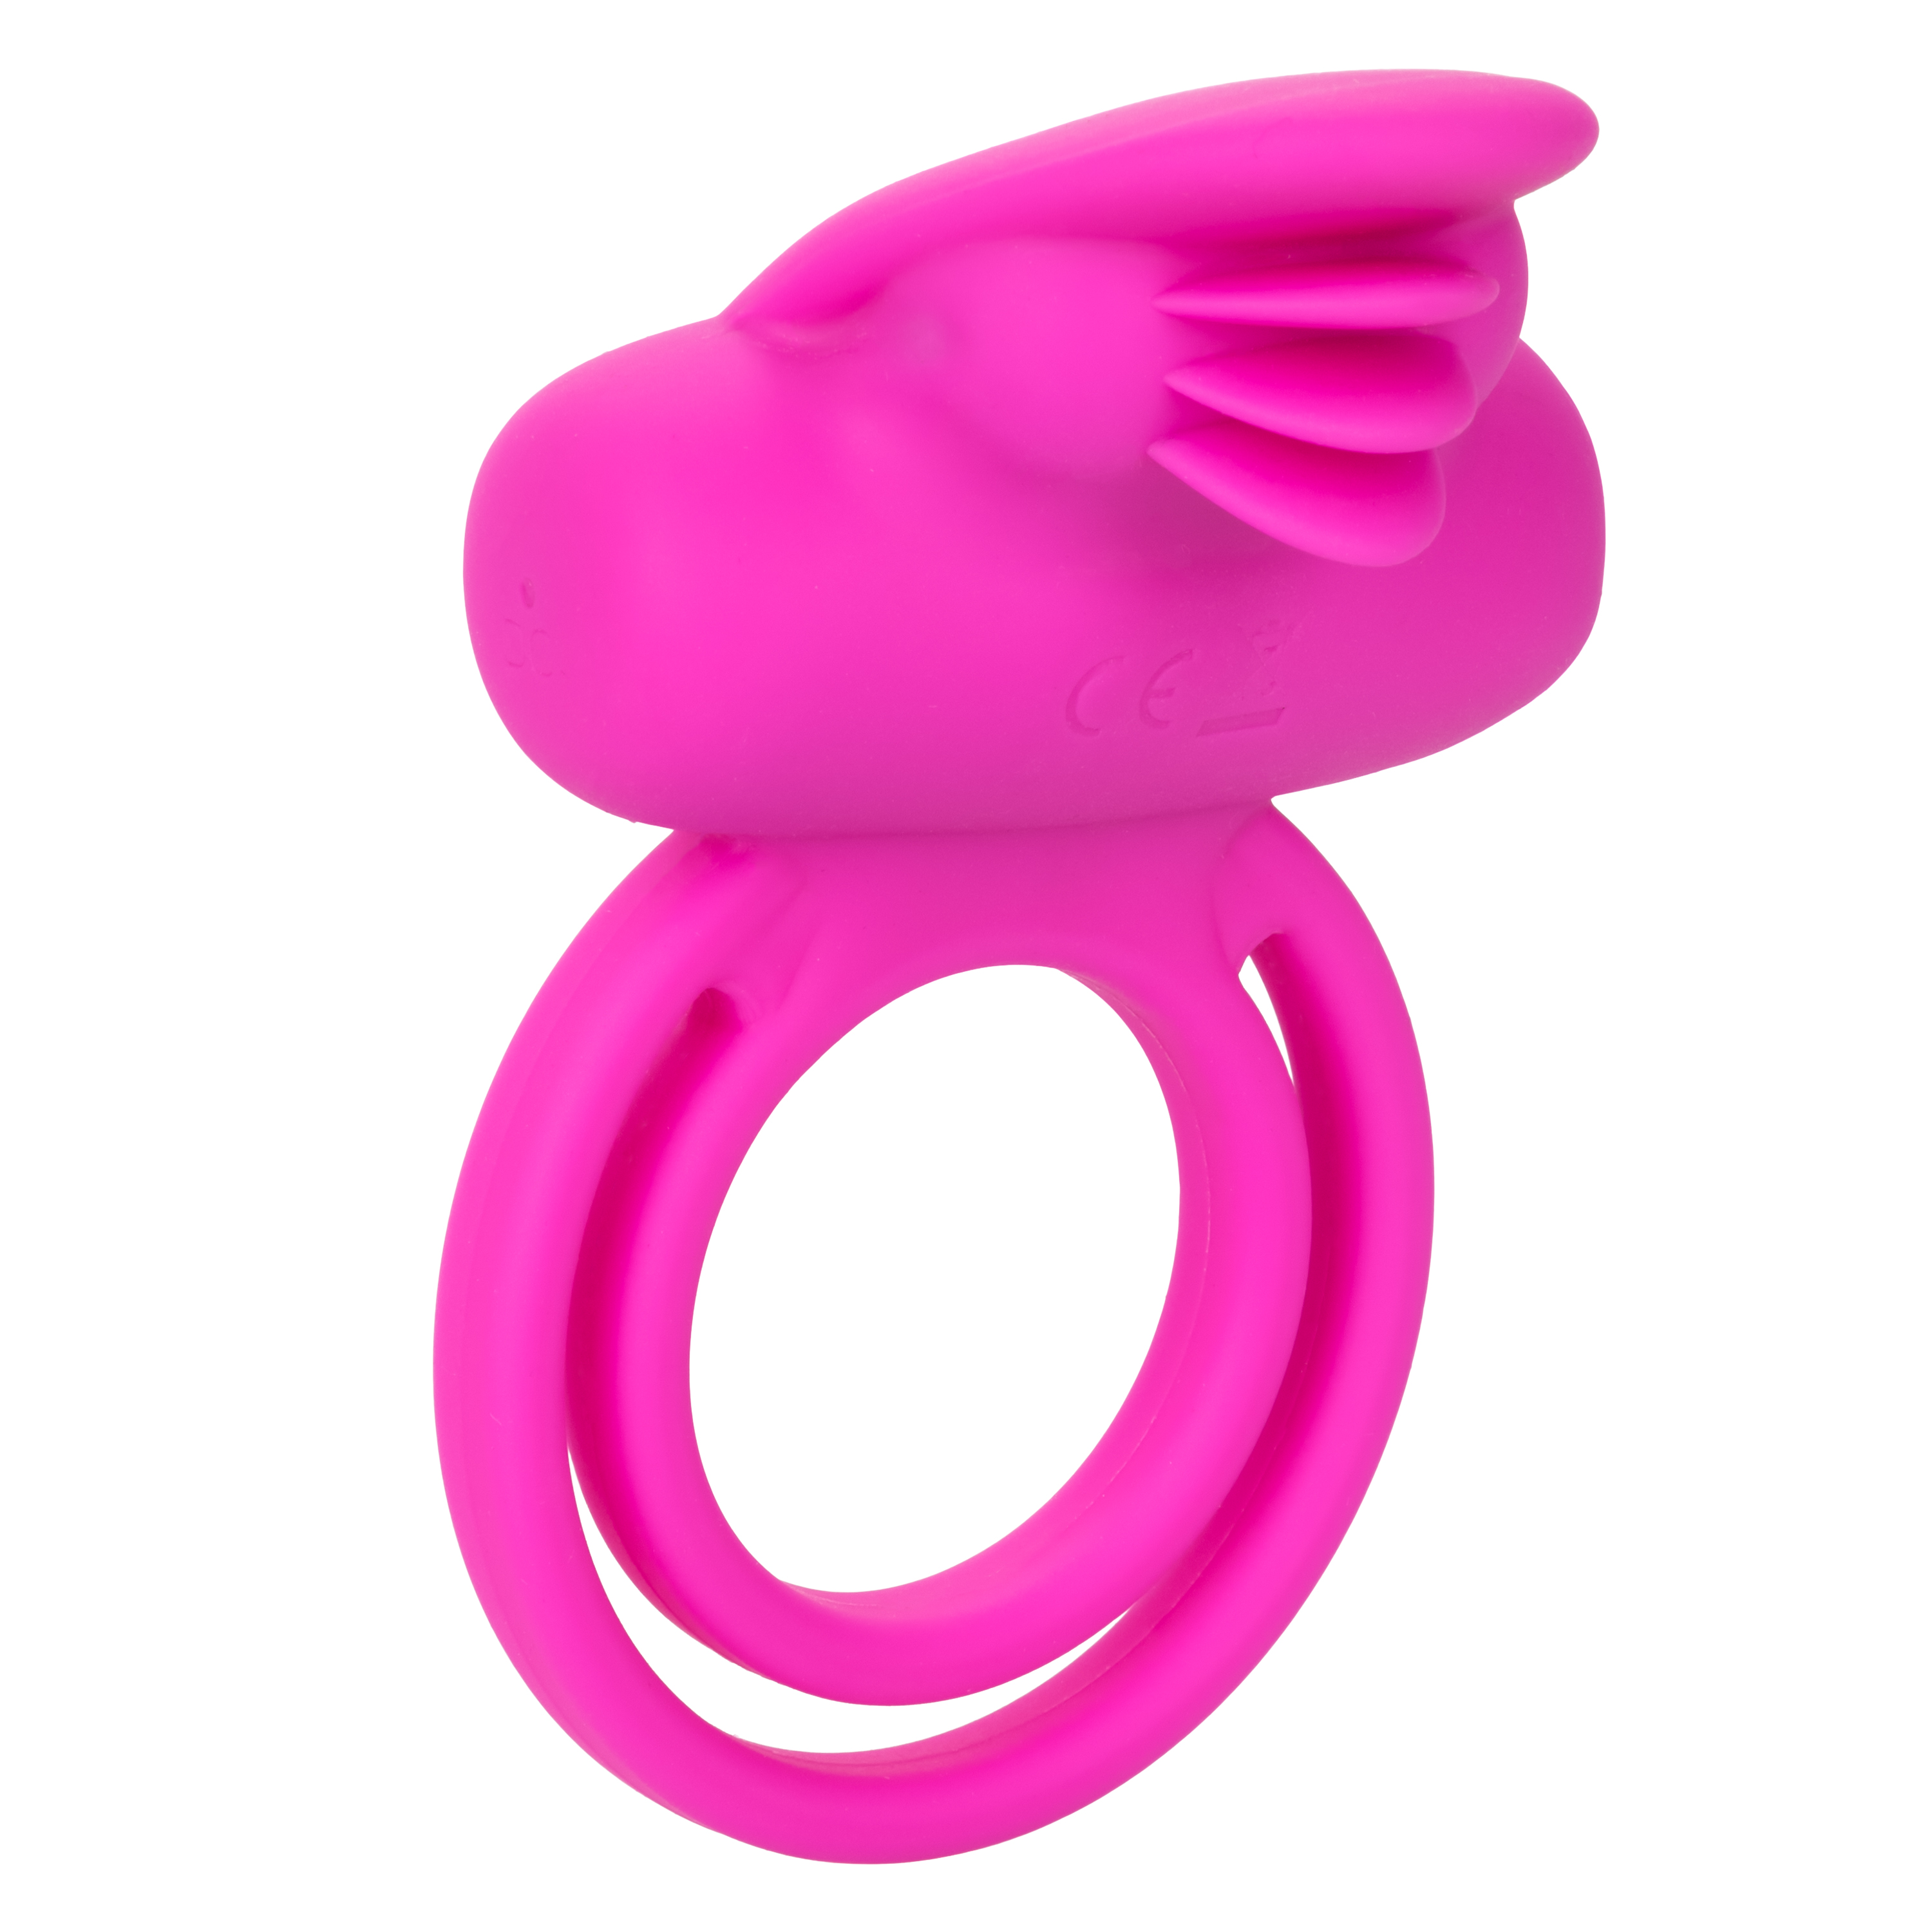 Silicone+Dual+Clit+Flicker+Vibrating+Cockring+Multispeed+Waterproof